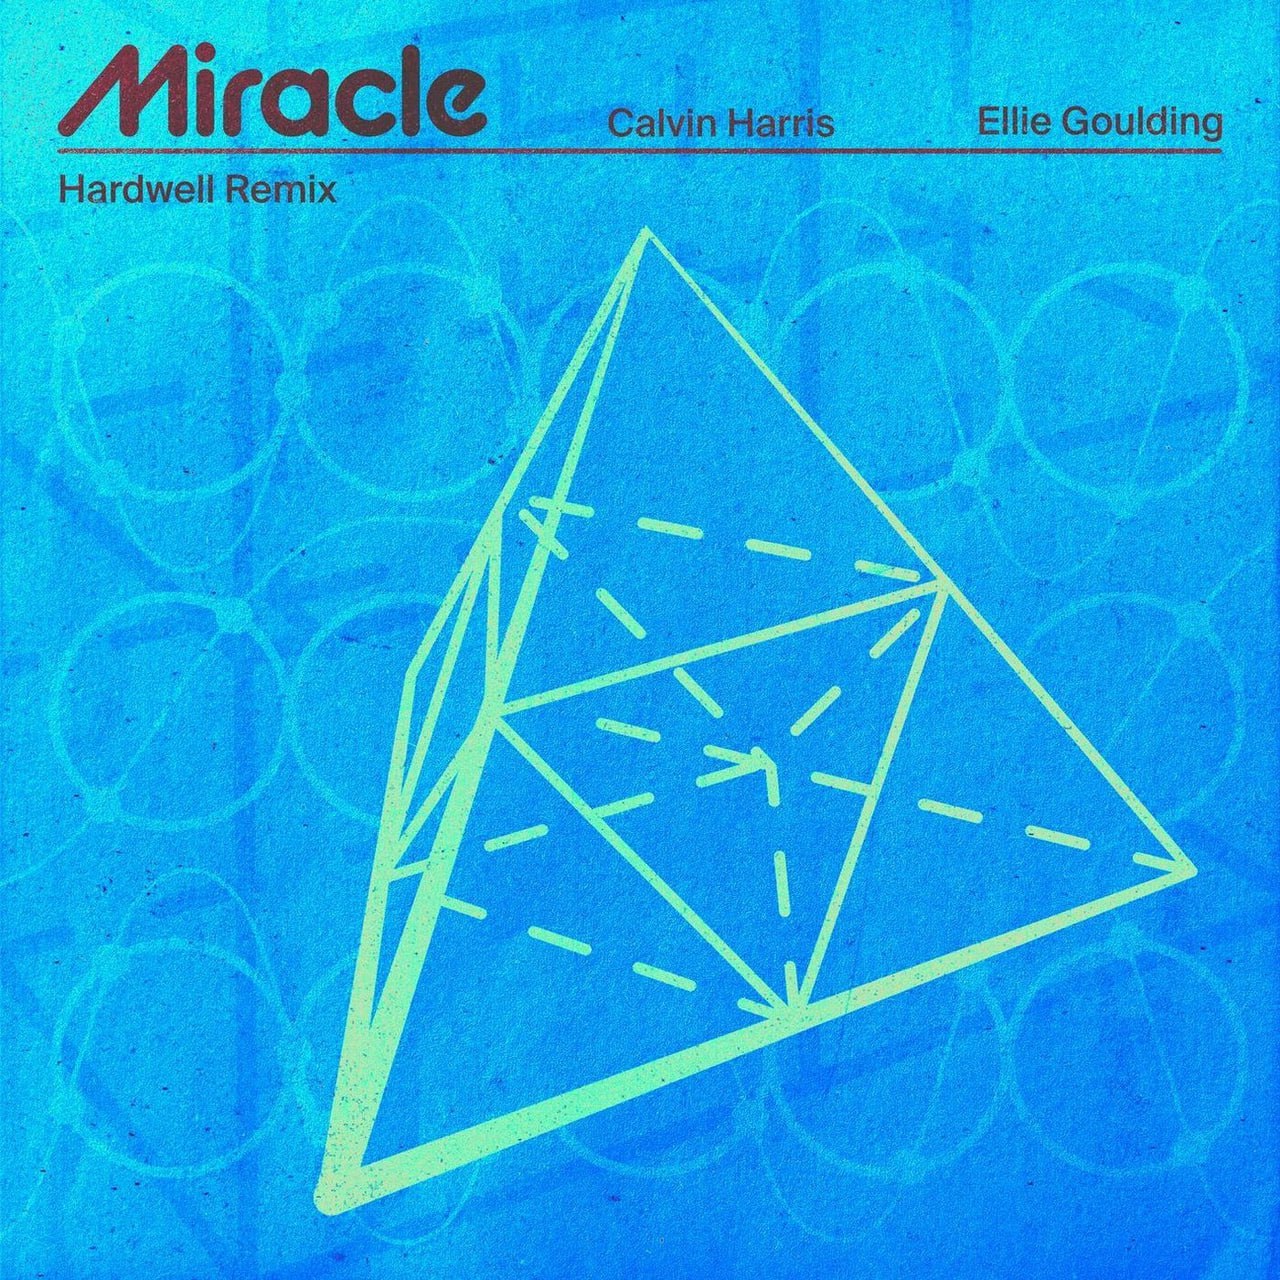 Calvin Harris & Ellie Goulding - Miracle (Hardwell Extended Remix)